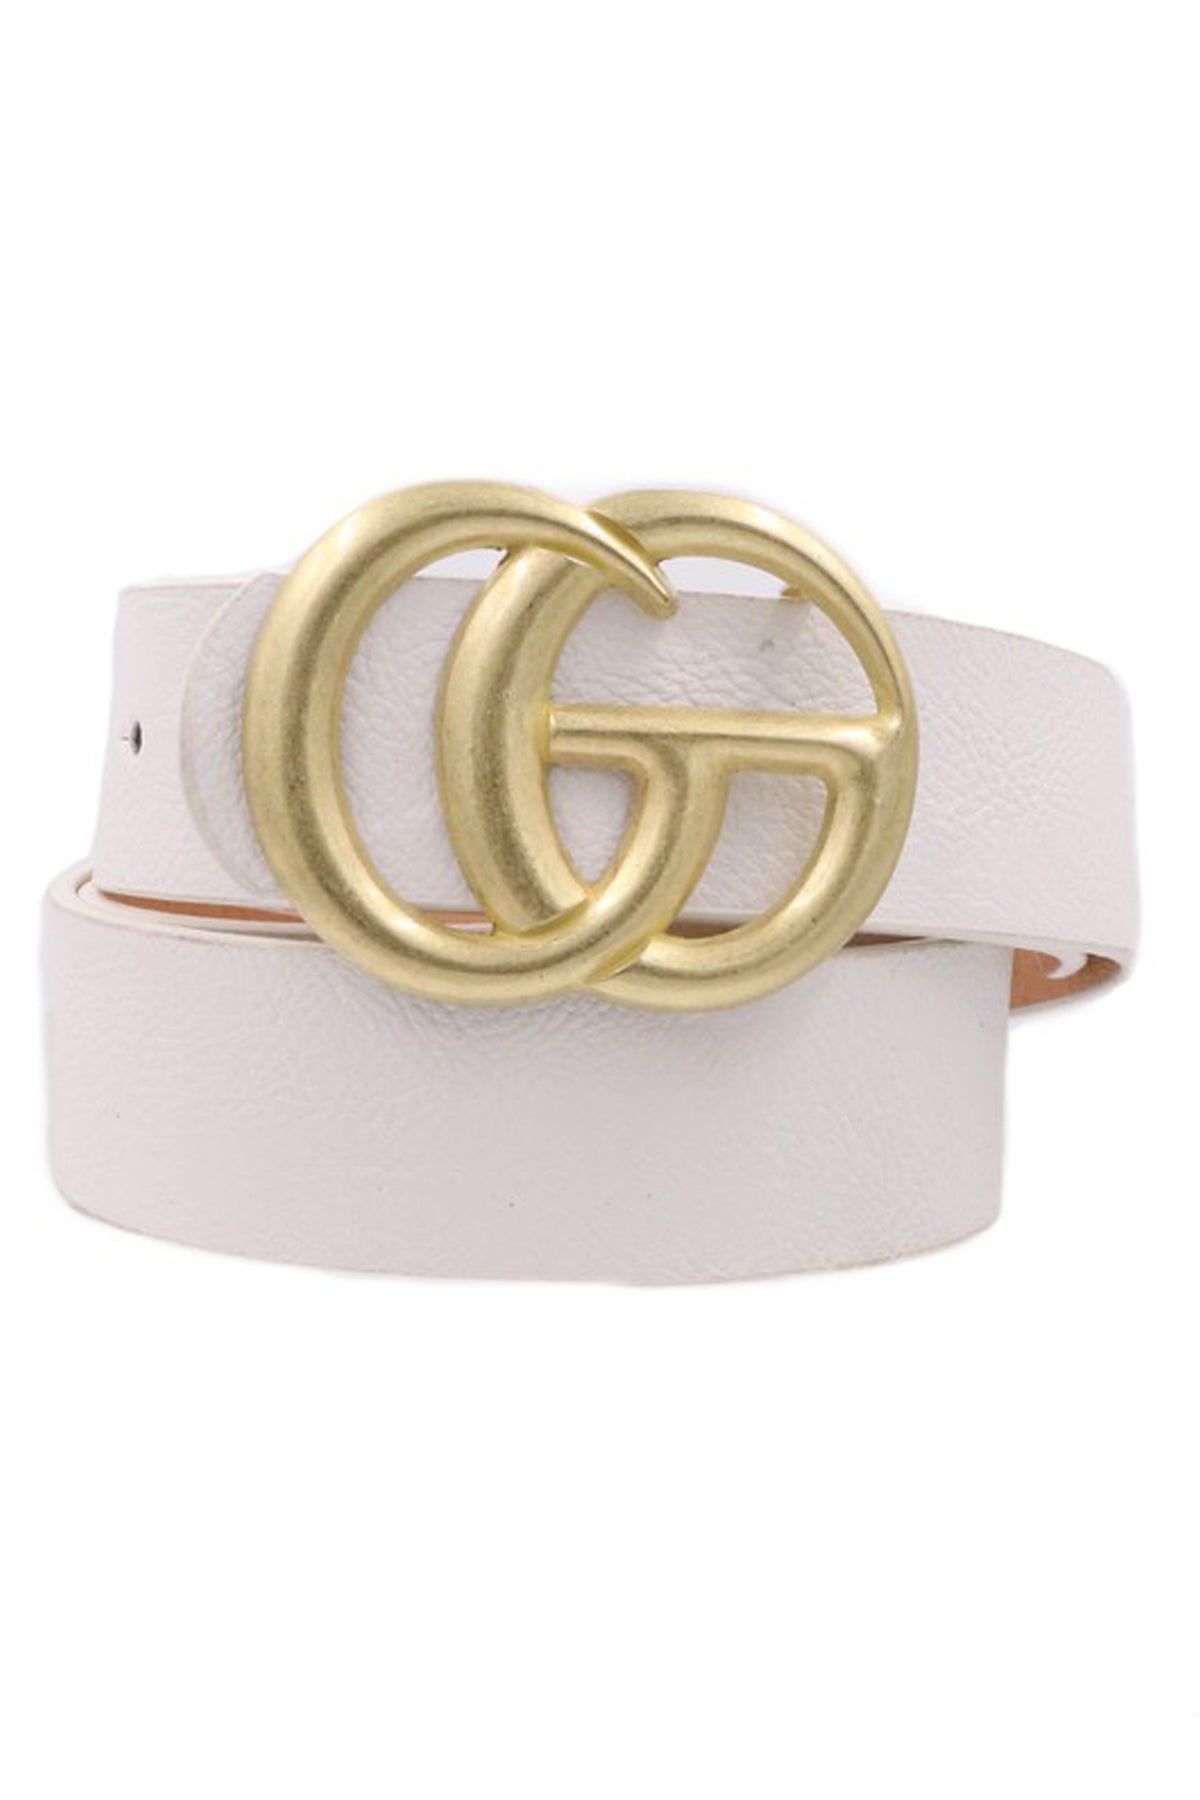 Gold Double G White Faux Leather Belt